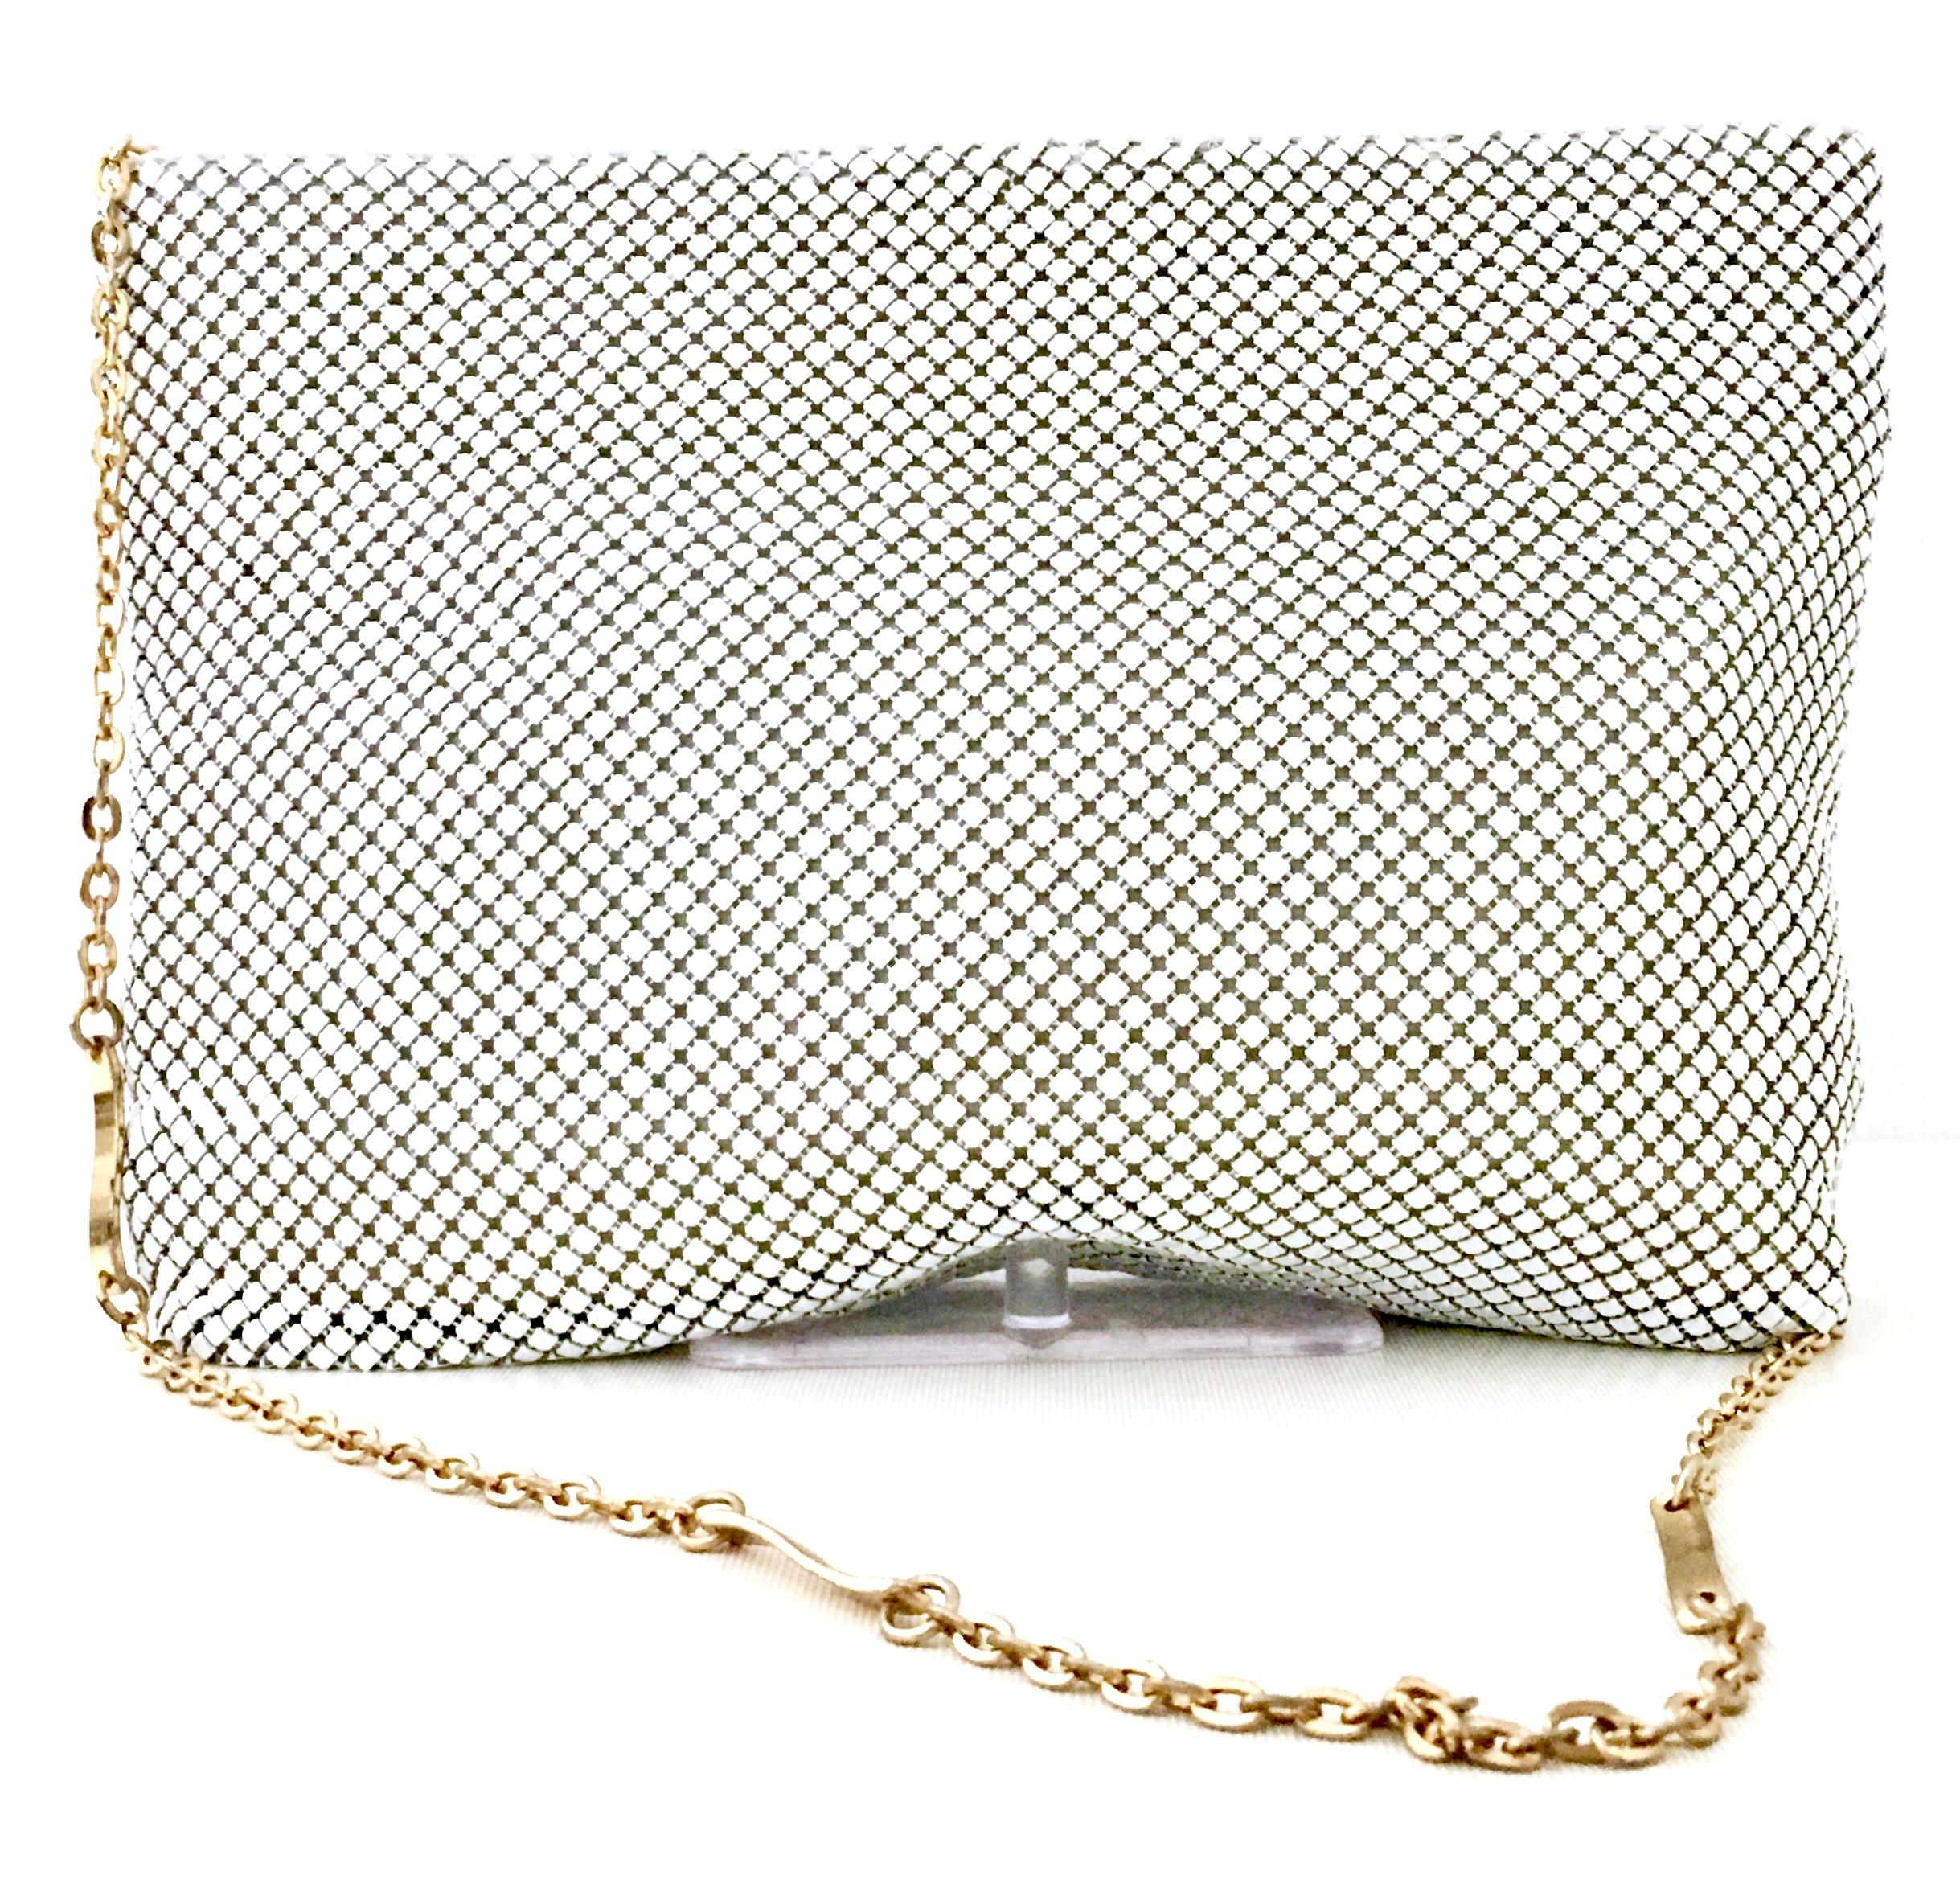 1970'S Whiting & Davis White Metal Mesh & Gold Chain Link Shoulder Strap Hand Bag. This rare white metal mesh bag features a lovely gold plate chain link shoulder strap, white leather detail and gold signed charm ornament at zipper closure. This bag